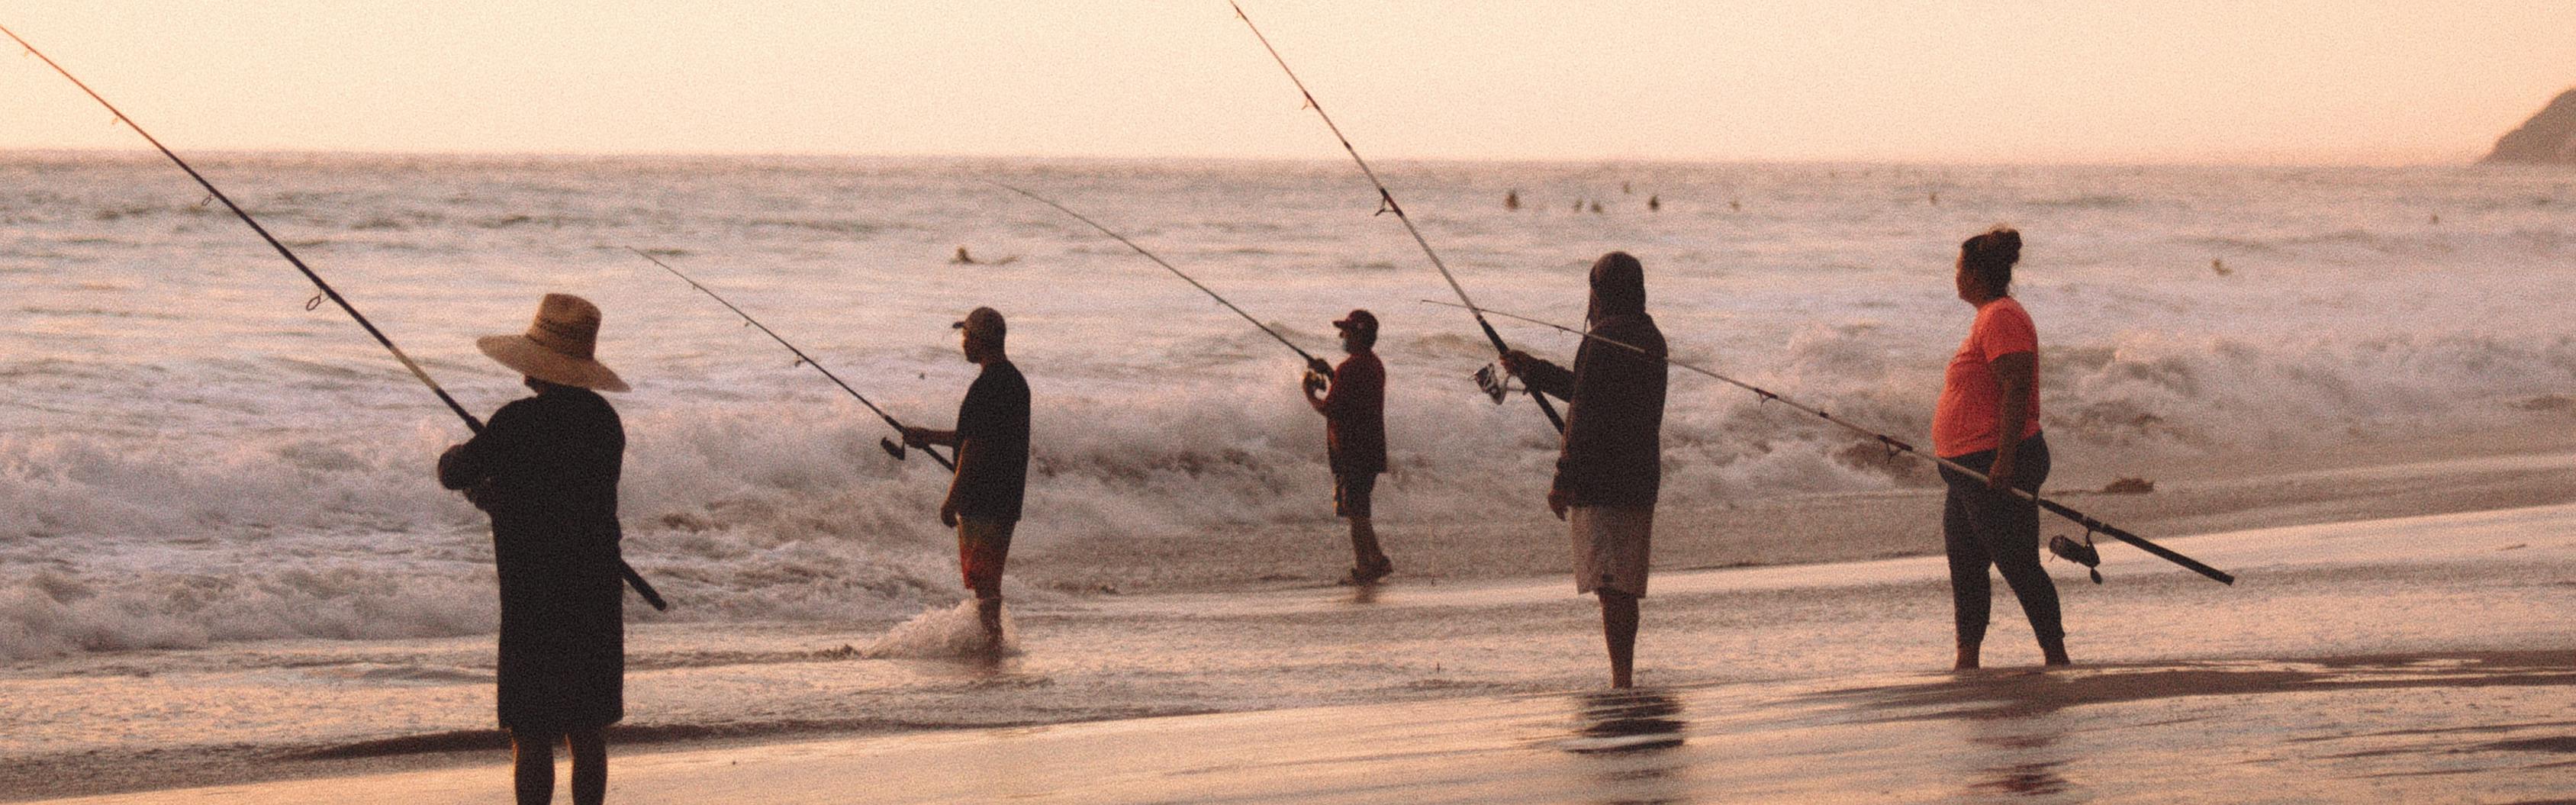 Five anglers stand in the waves and fish on the sea.